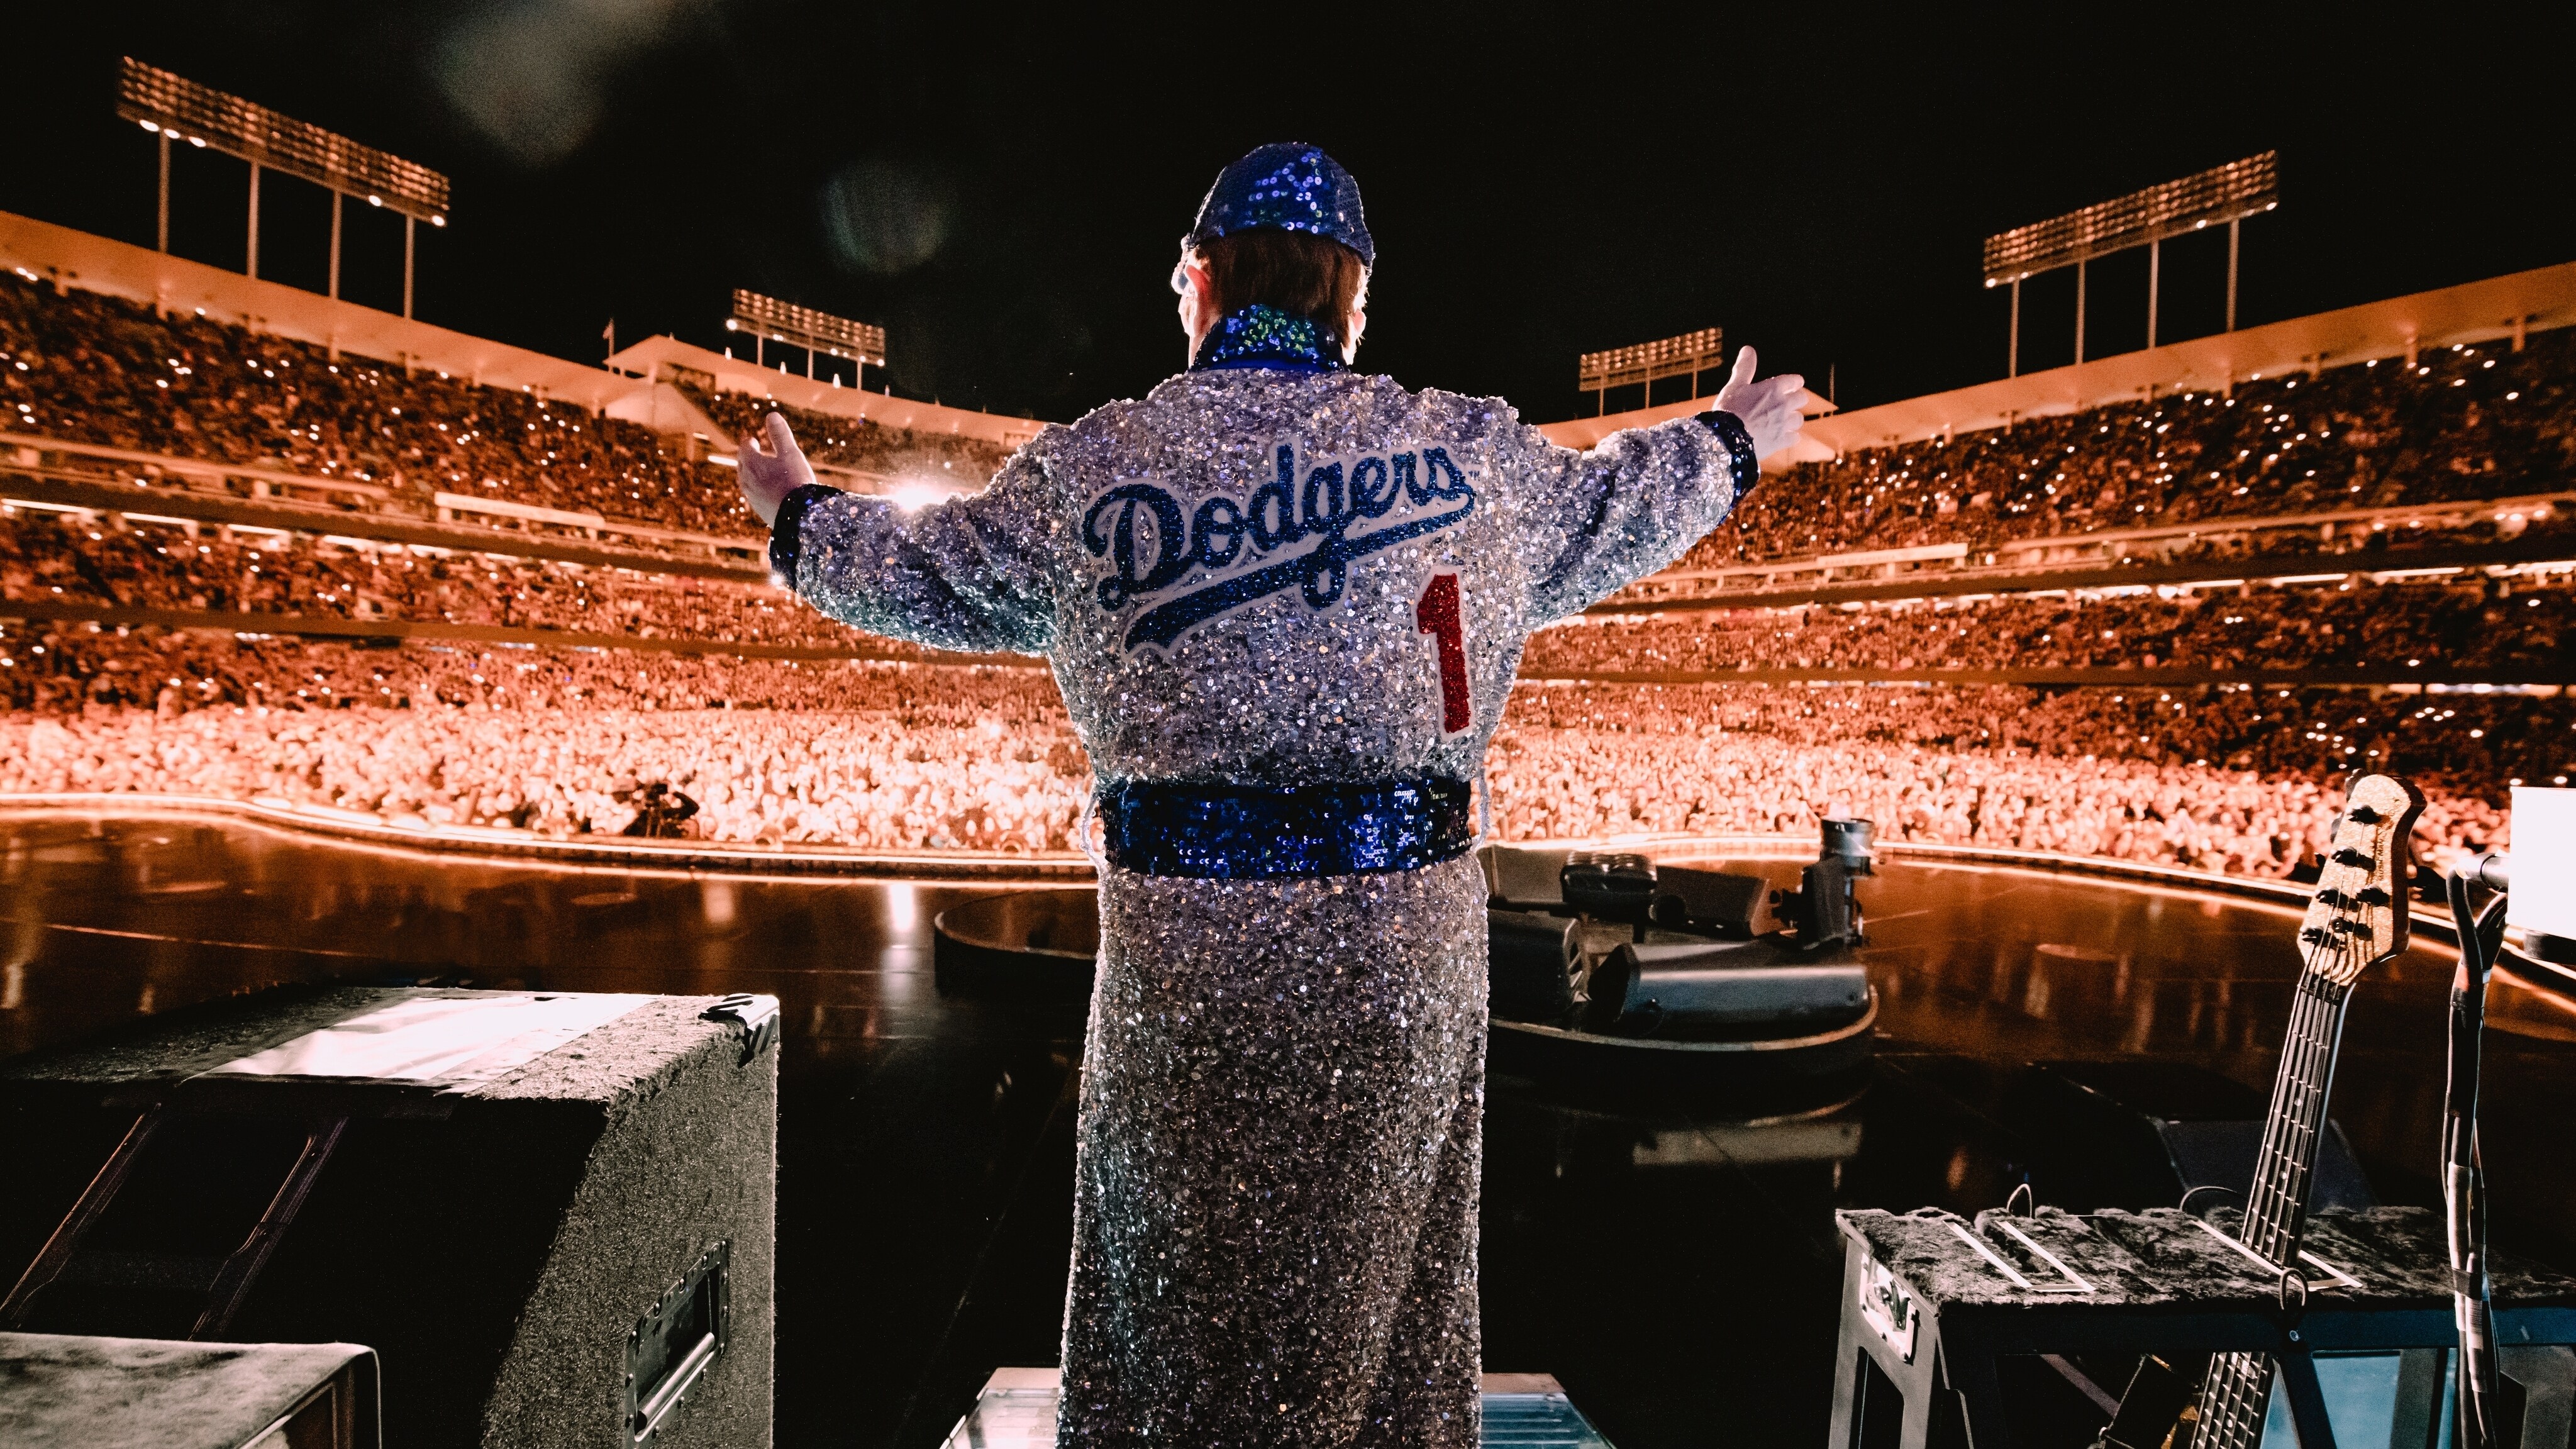 DISNEY+ RELEASES PHOTOS AND FOOTAGE FROM ITS THREE-HOUR LIVESTREAM EVENT “ELTON JOHN LIVE: FAREWELL FROM DODGER STADIUM” AS ELTON TAKES HIS FINAL NORTH AMERICAN BOW